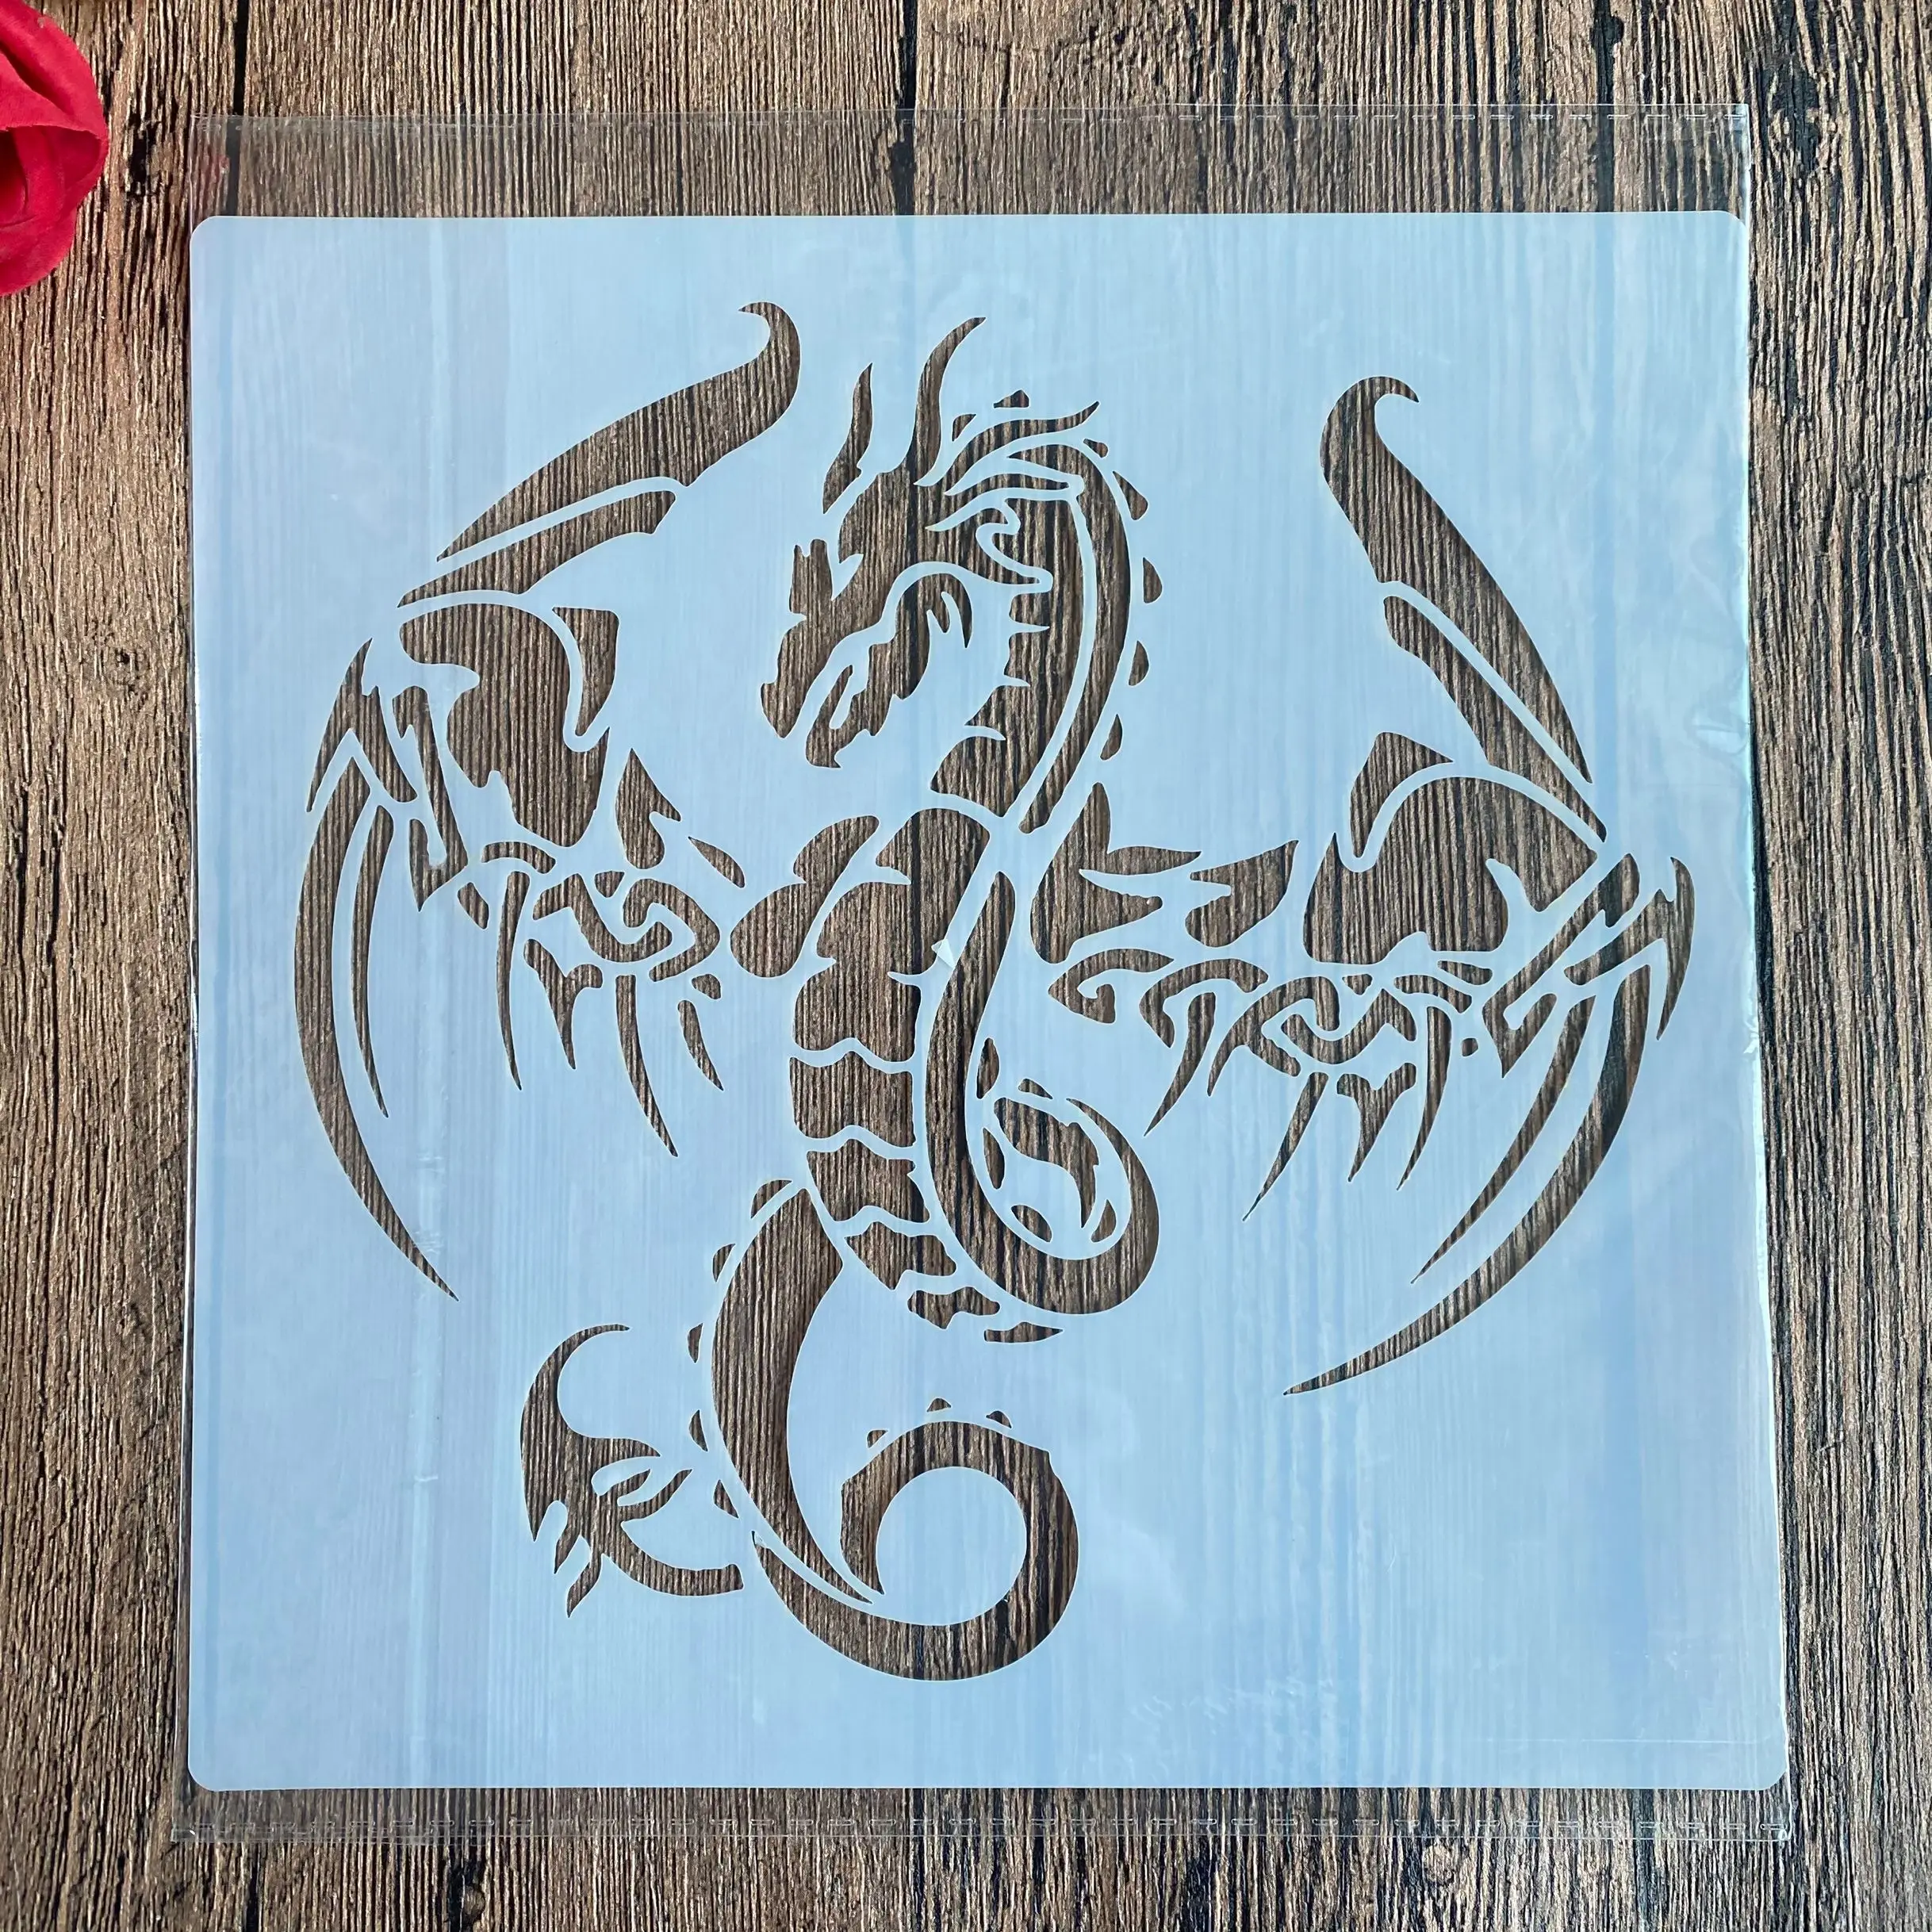 20 *20 cm  DIY Dragon mandala mold for painting stencils stamped photo album embossed paper card on wood, fabric, wall